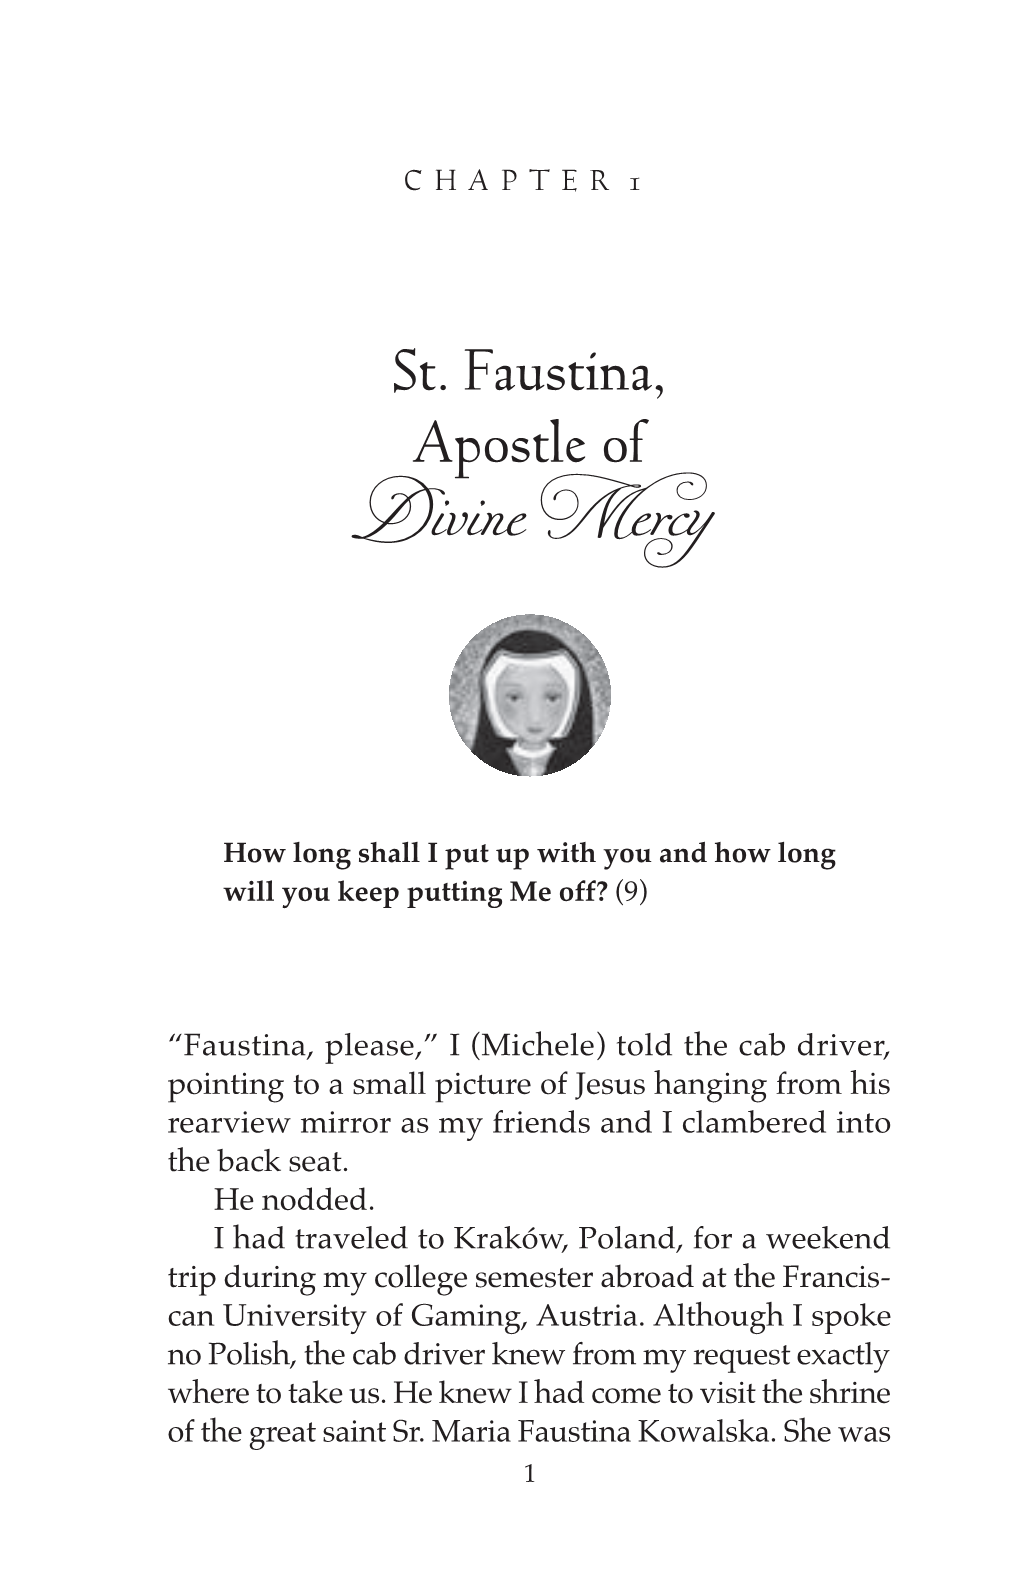 St. Faustina, Apostle of Divine Mercy 3